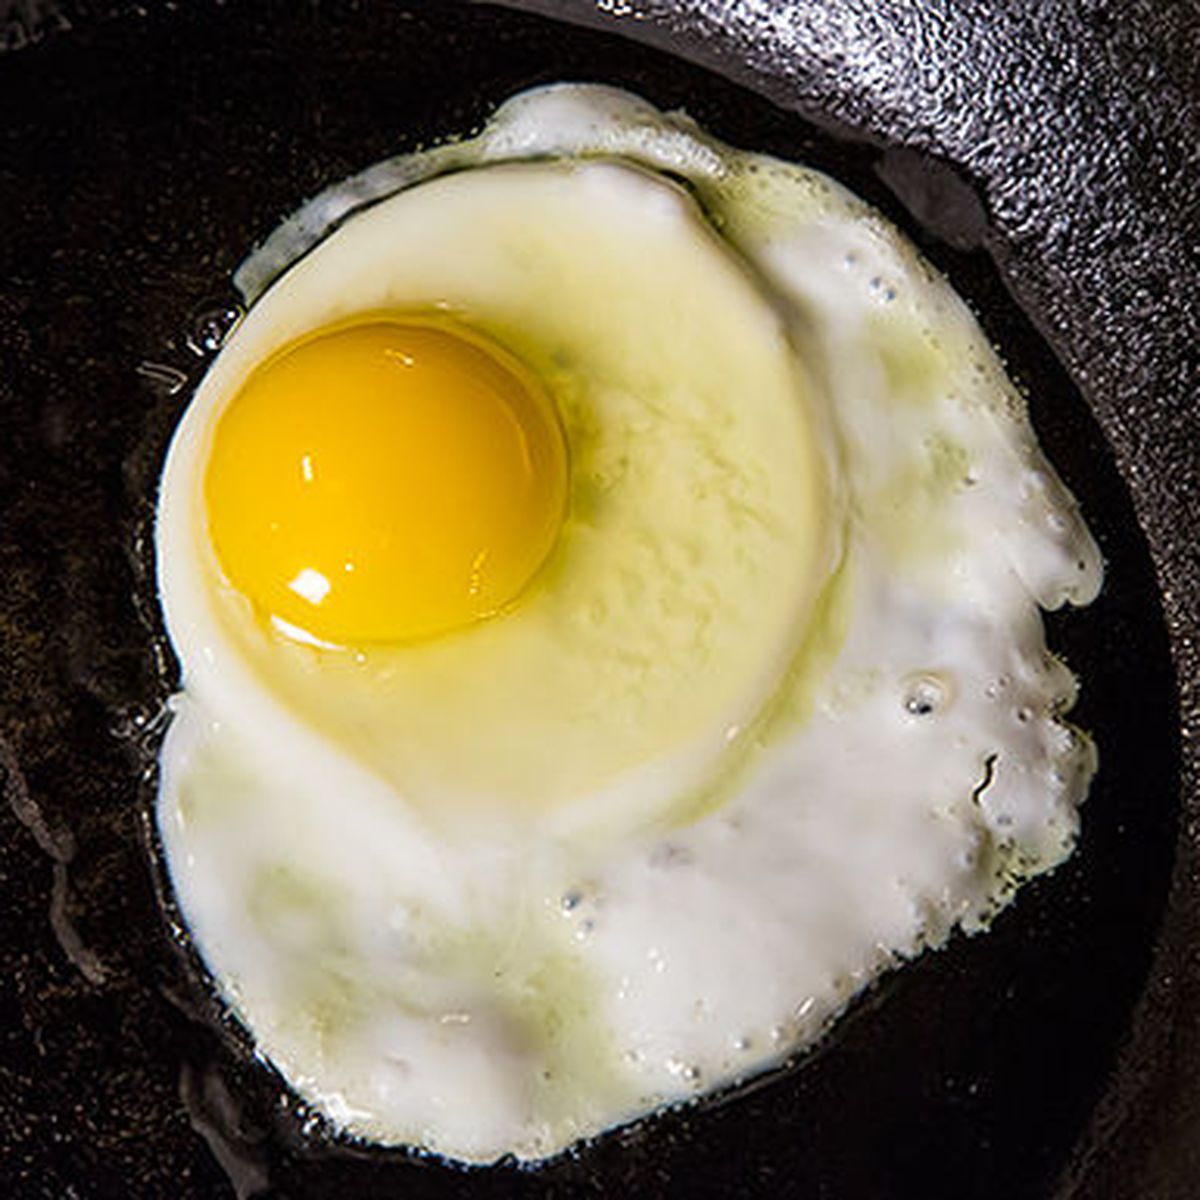 Video: How to Make a Sunny Side Up Egg